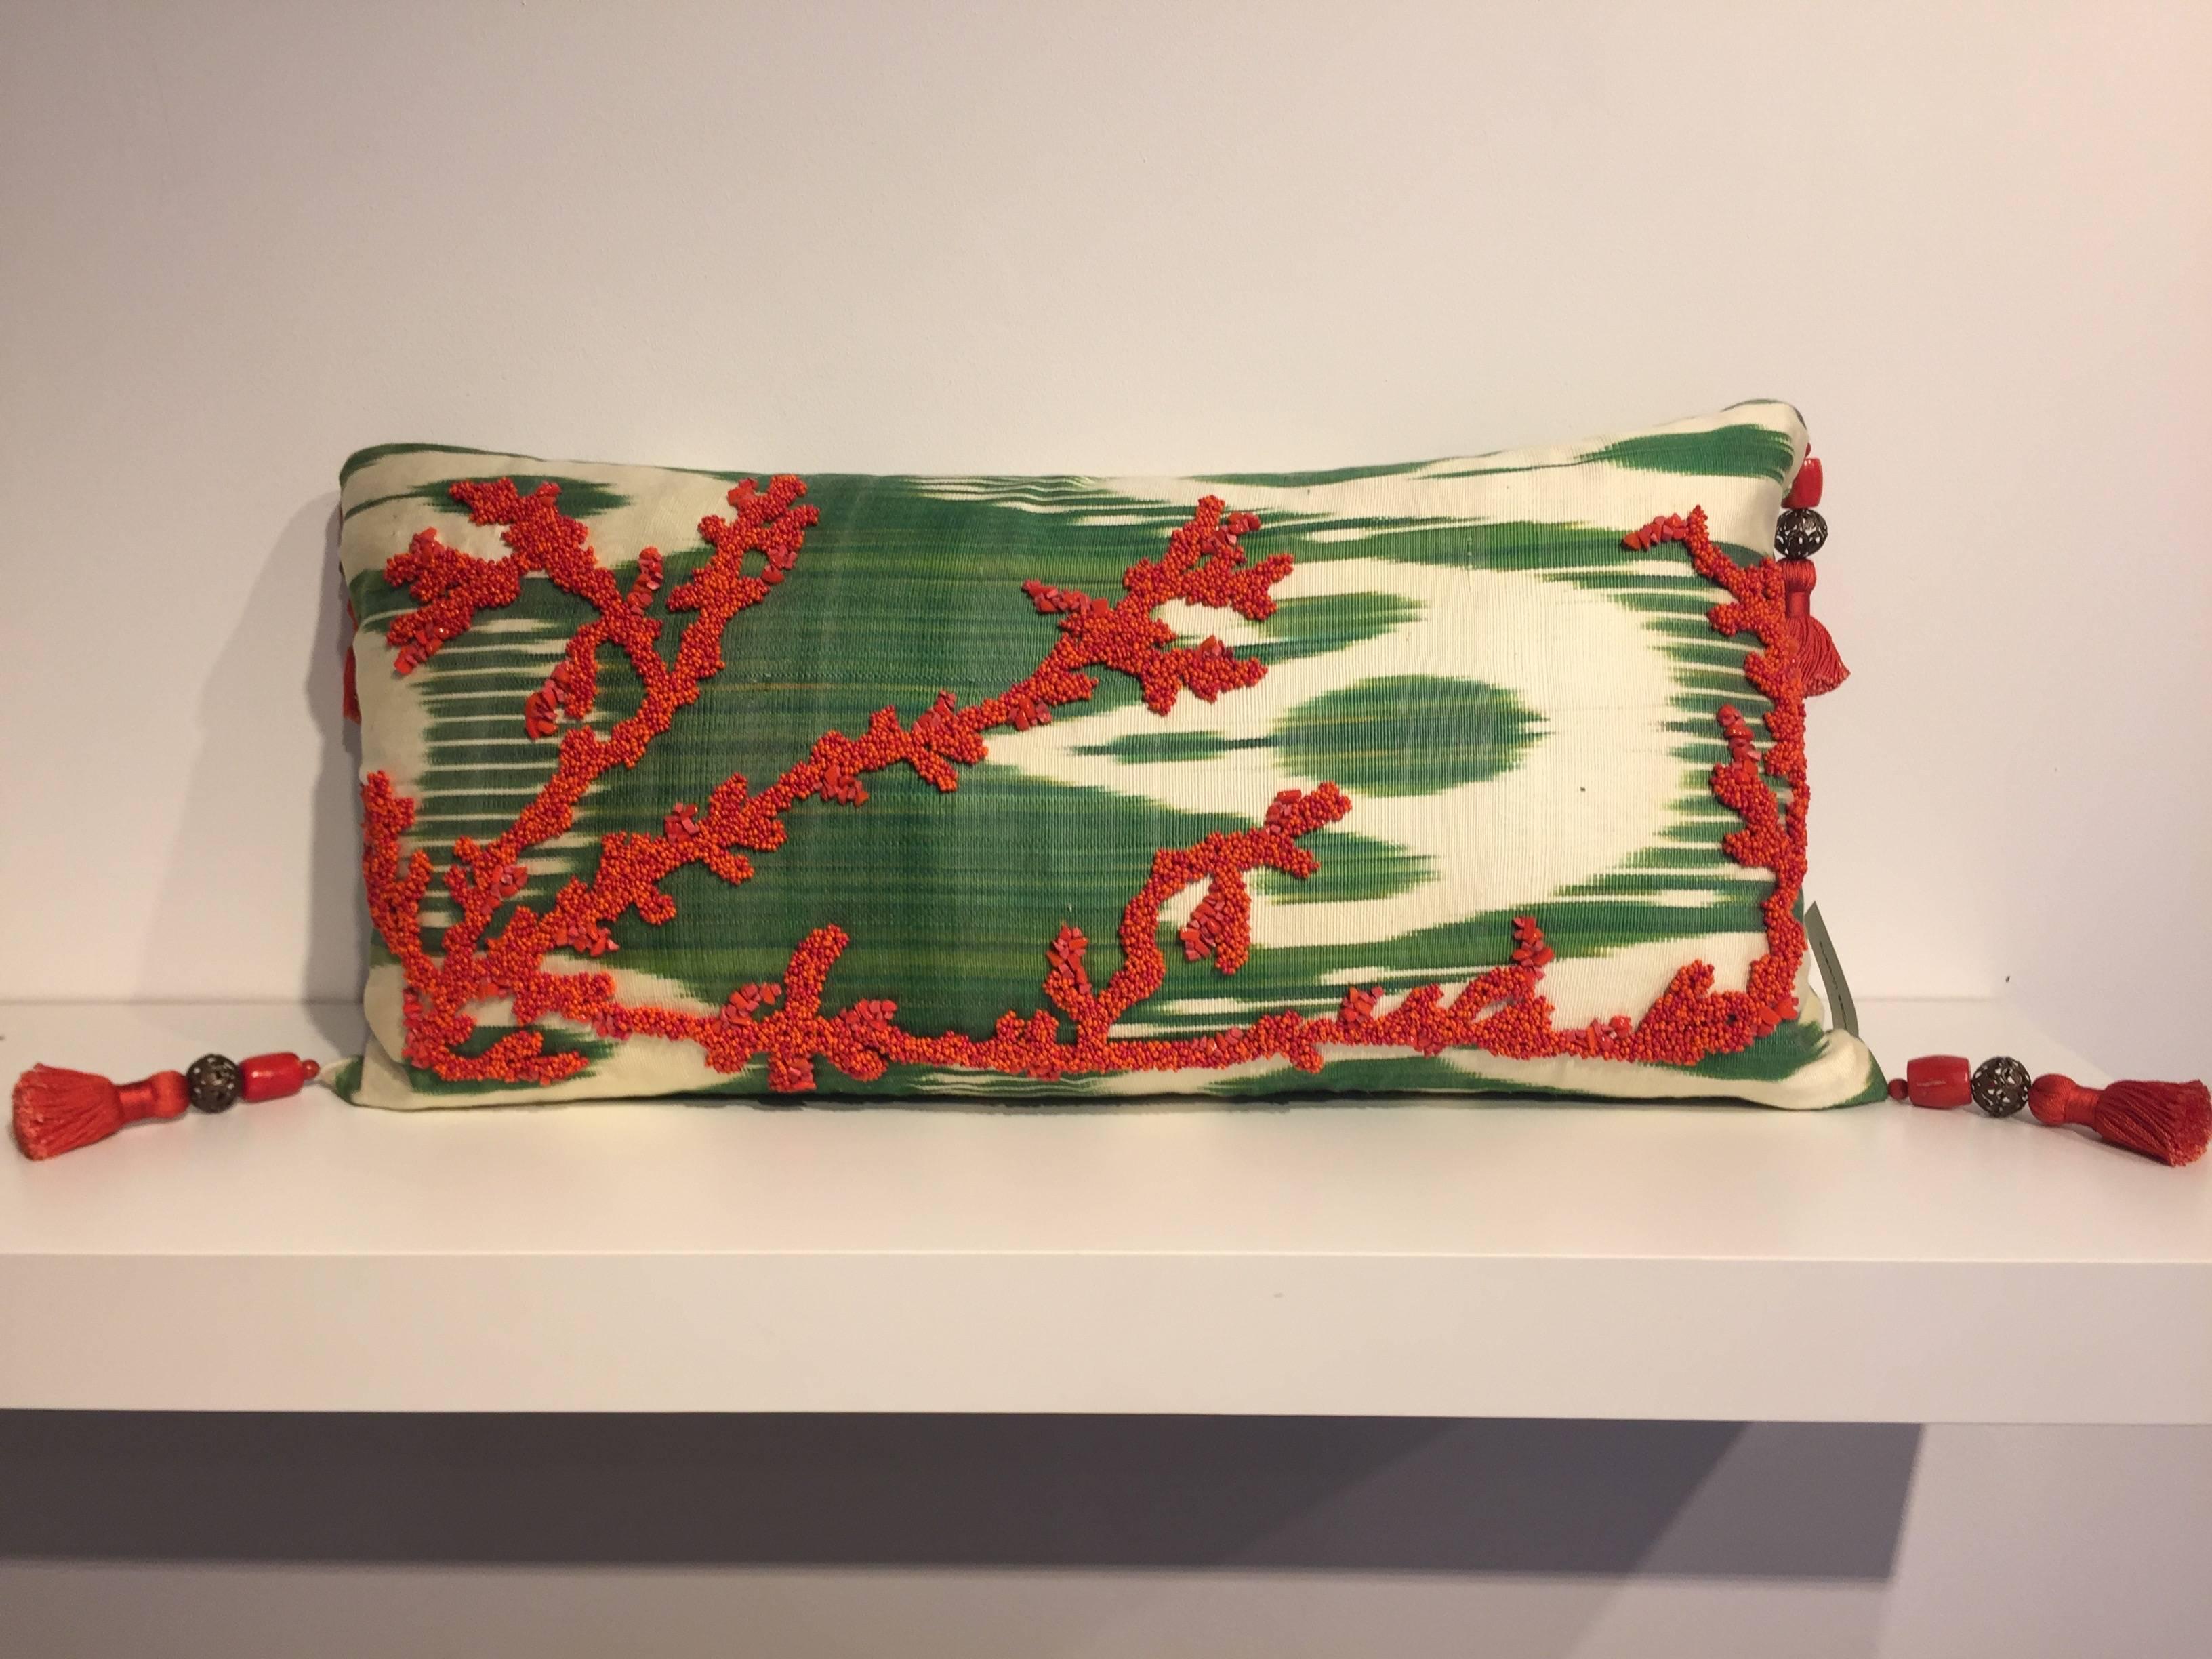 One pair silk cushions, coral design hand embroidery with coral beads and coral chips on fabric vintage silk Ikat color ivory and jade green, corner tassels - 9cm length made out of silk thread and big coral pearls, four no per cushion - cushion